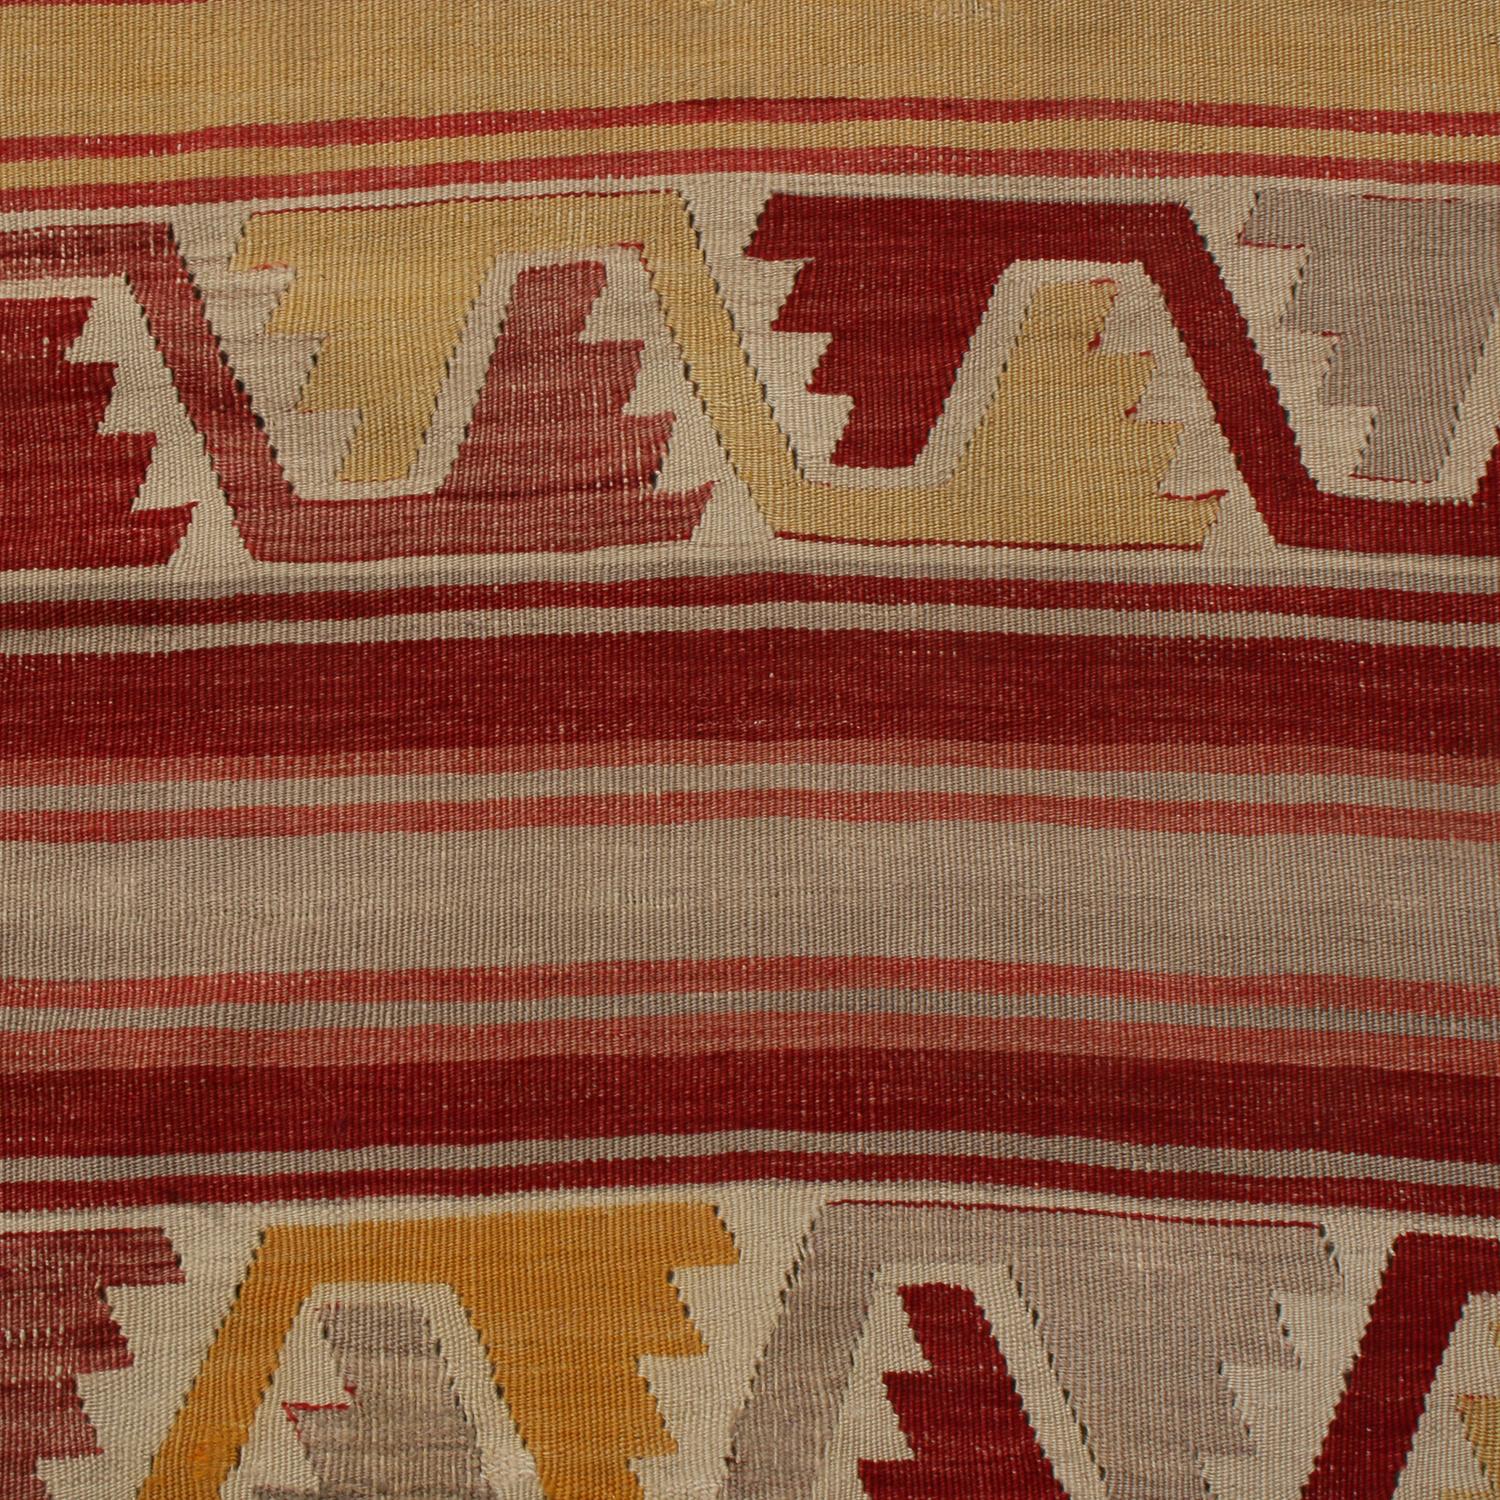 Hand-Woven Vintage Konya Geometric Yellow and Red Wool Kilim Rug with Multi-Color Accents